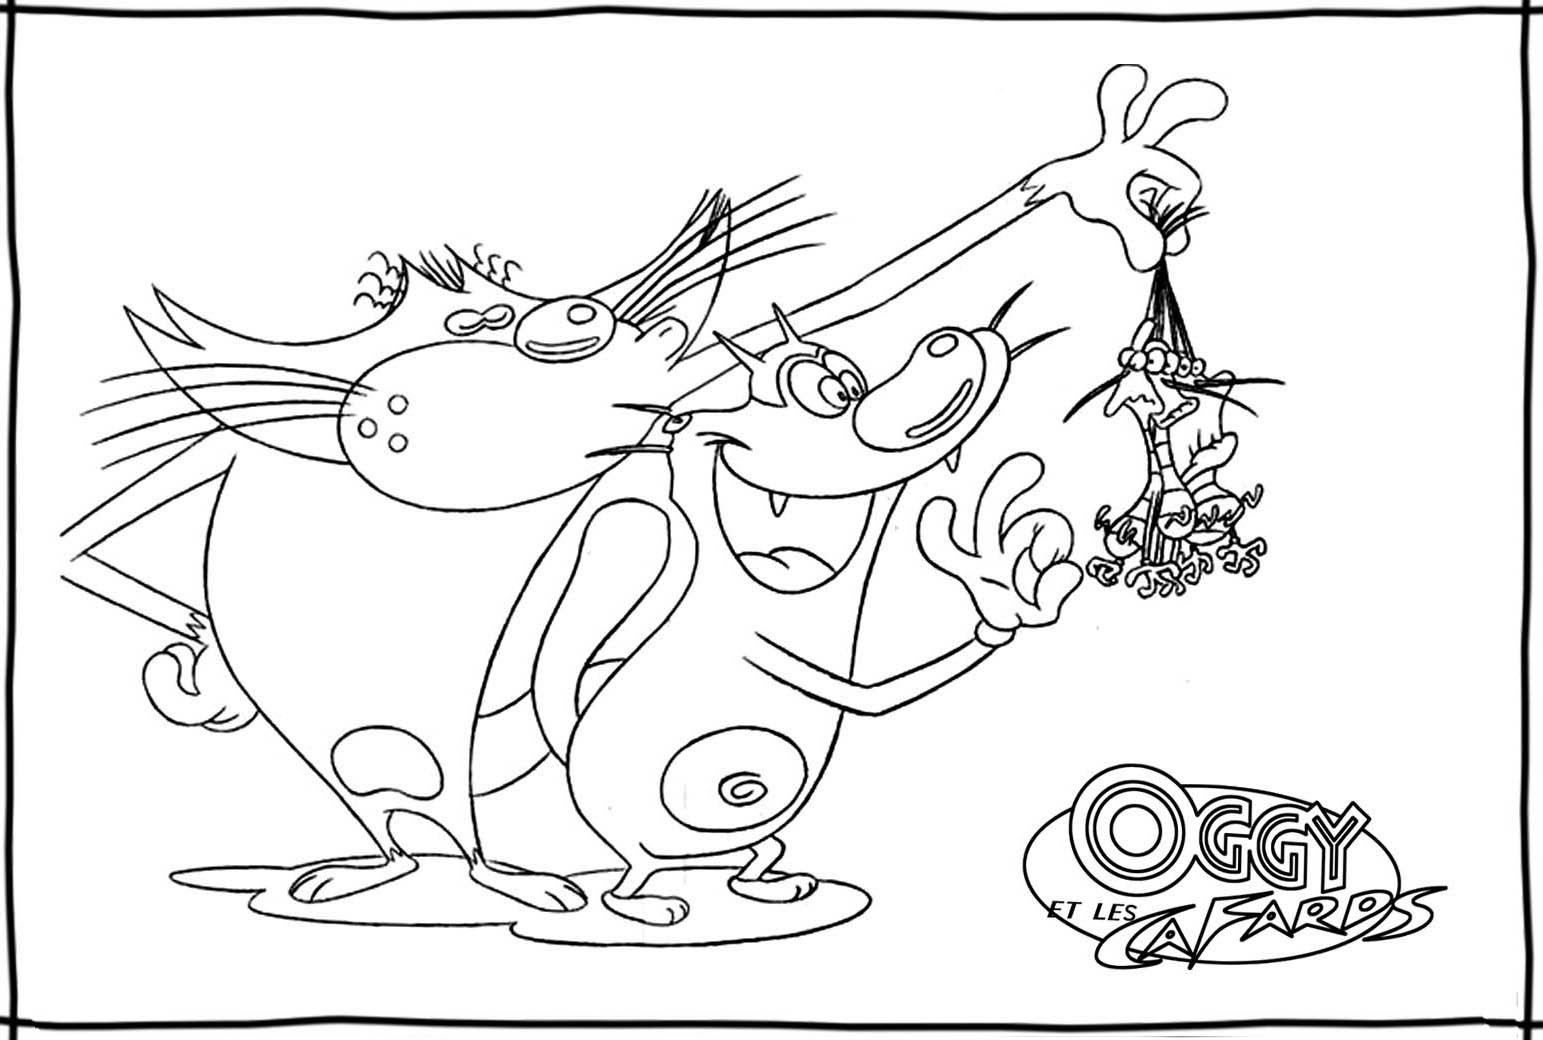 Coloring page: Oggy and the Cockroaches (Cartoons) #37878 - Free Printable Coloring Pages